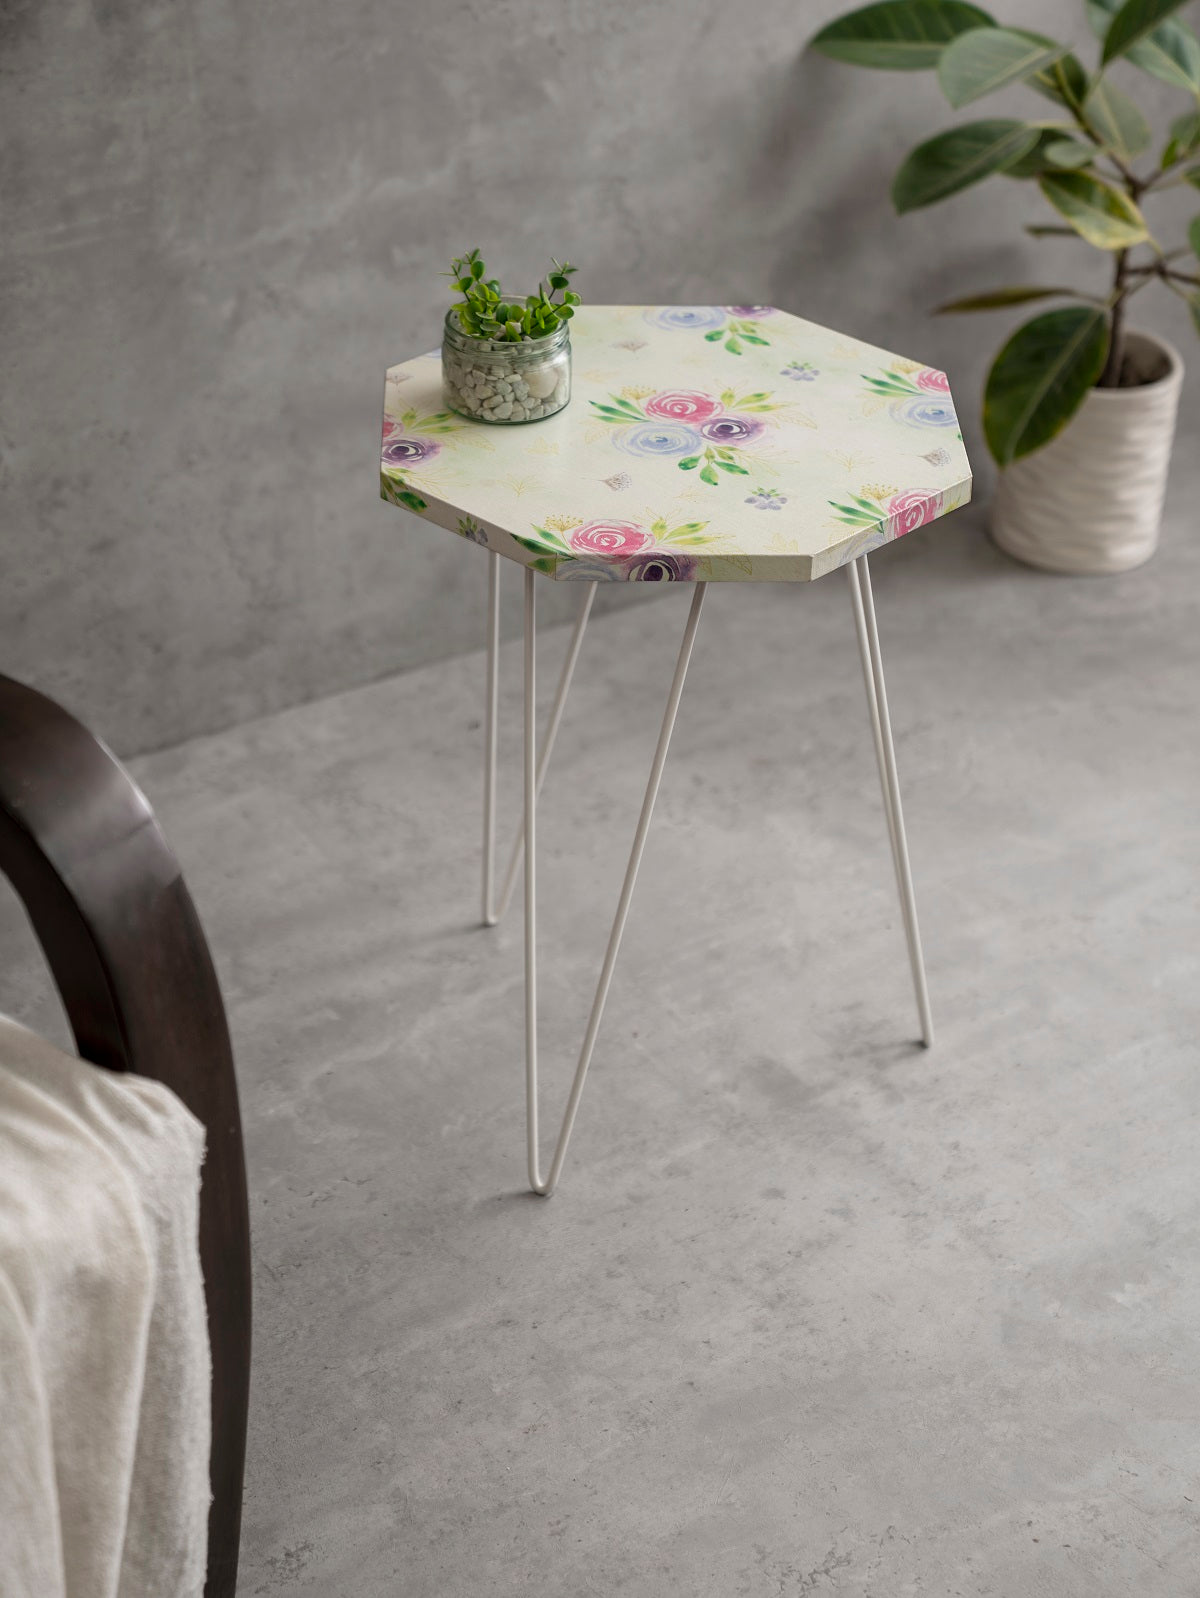 Blush Roses Octagon Side Tables with Hairpin Legs, Side Tables, Wooden Tables, Living Room Decor by A Tiny Mistake